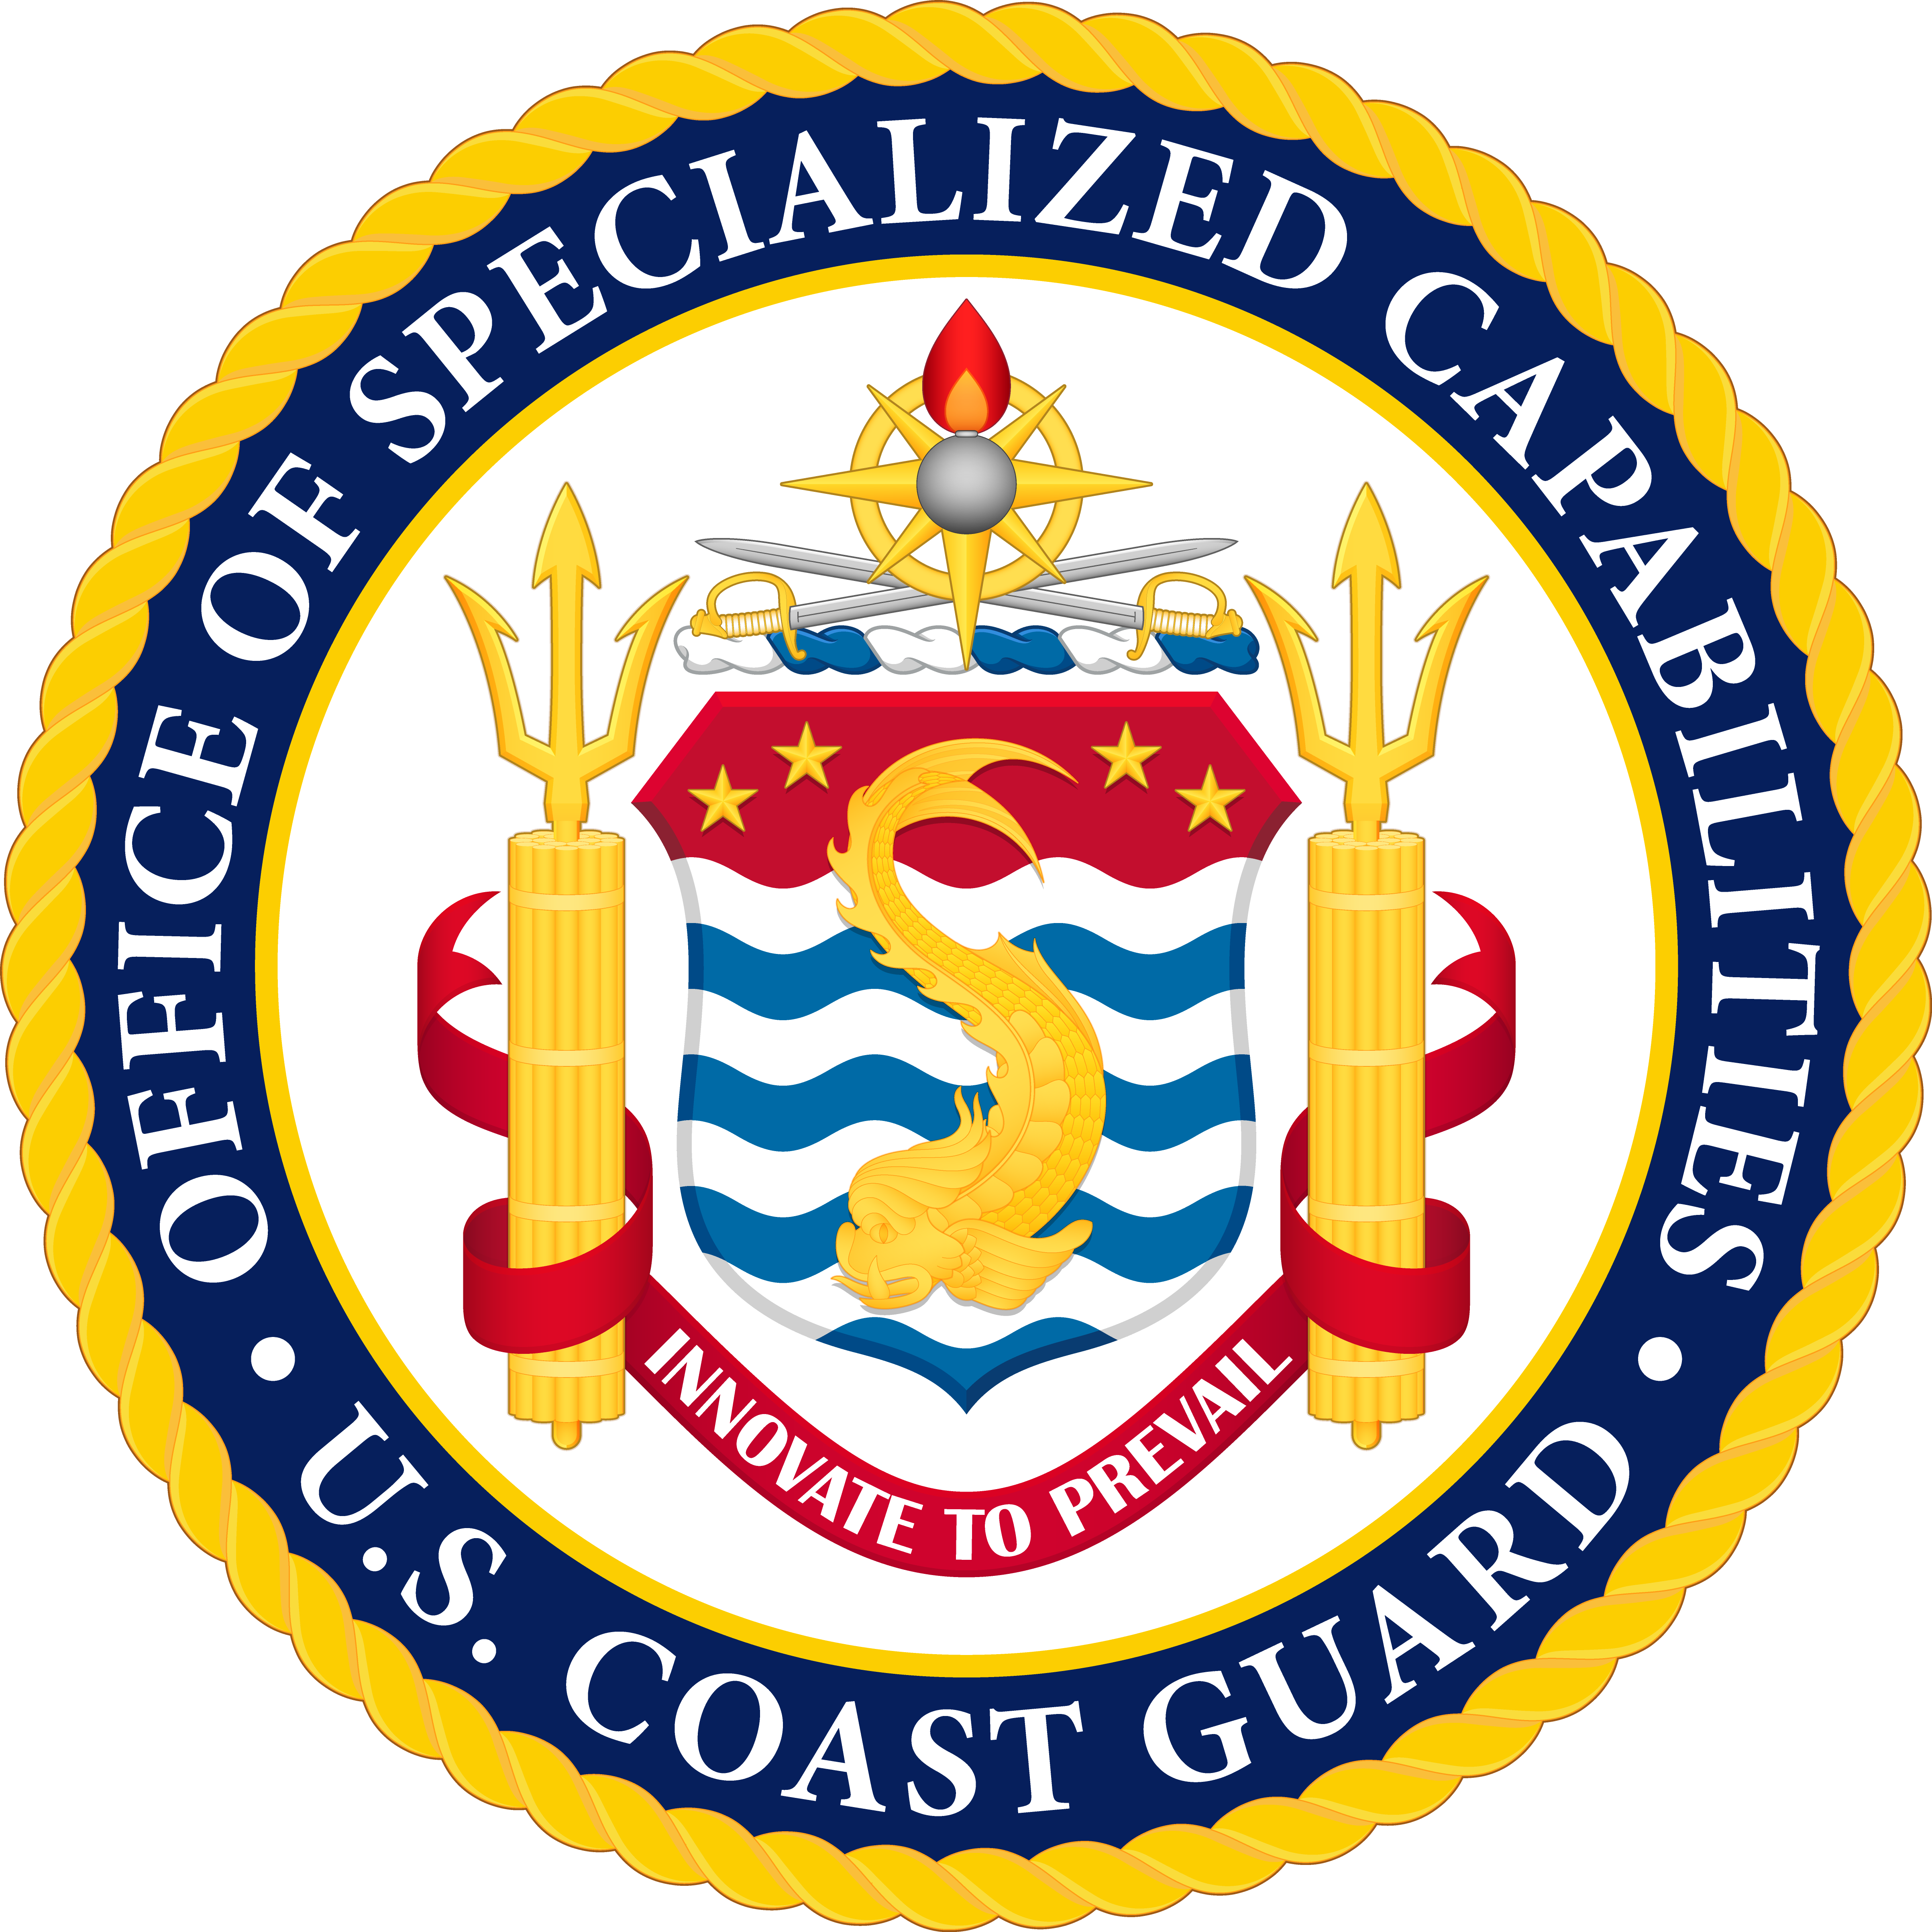 Office of Specialized Capabilities (CG-721)